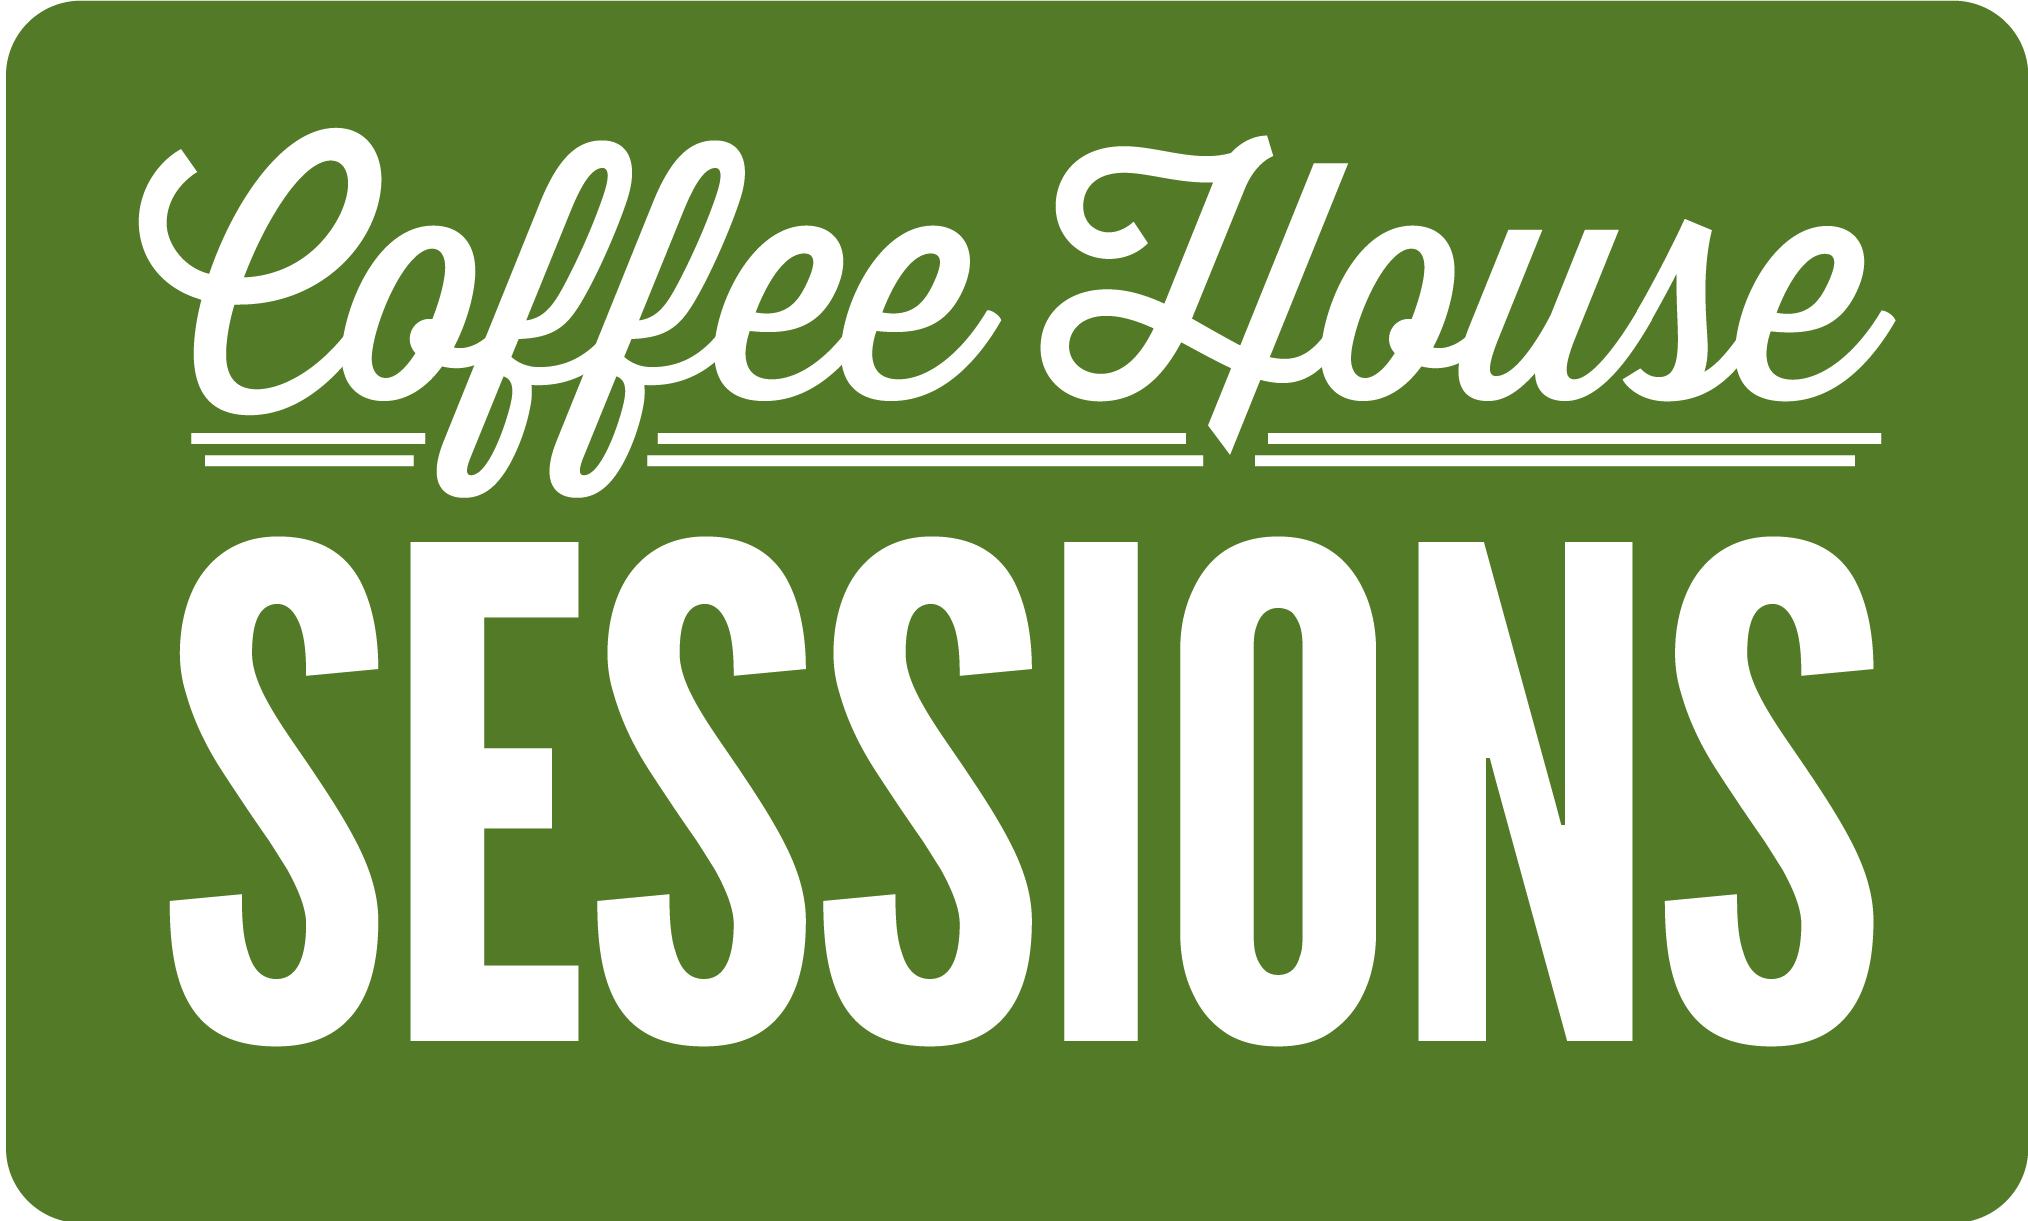 Coffee House Sessions